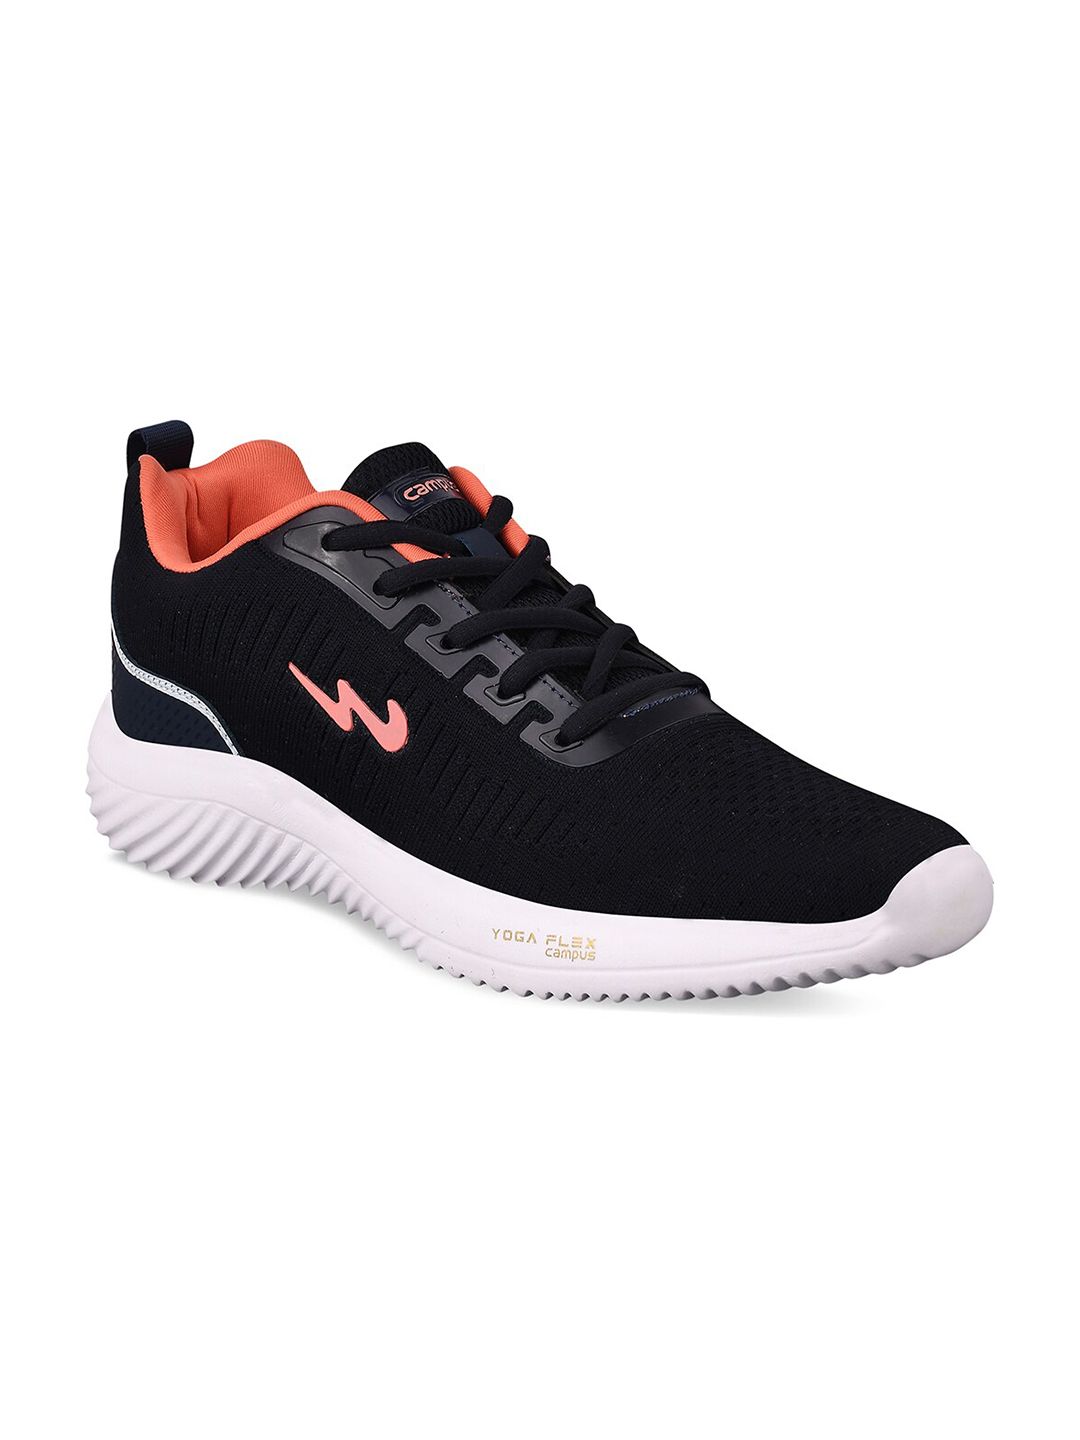 Campus Women Navy Blue Mesh Running Shoes Price in India